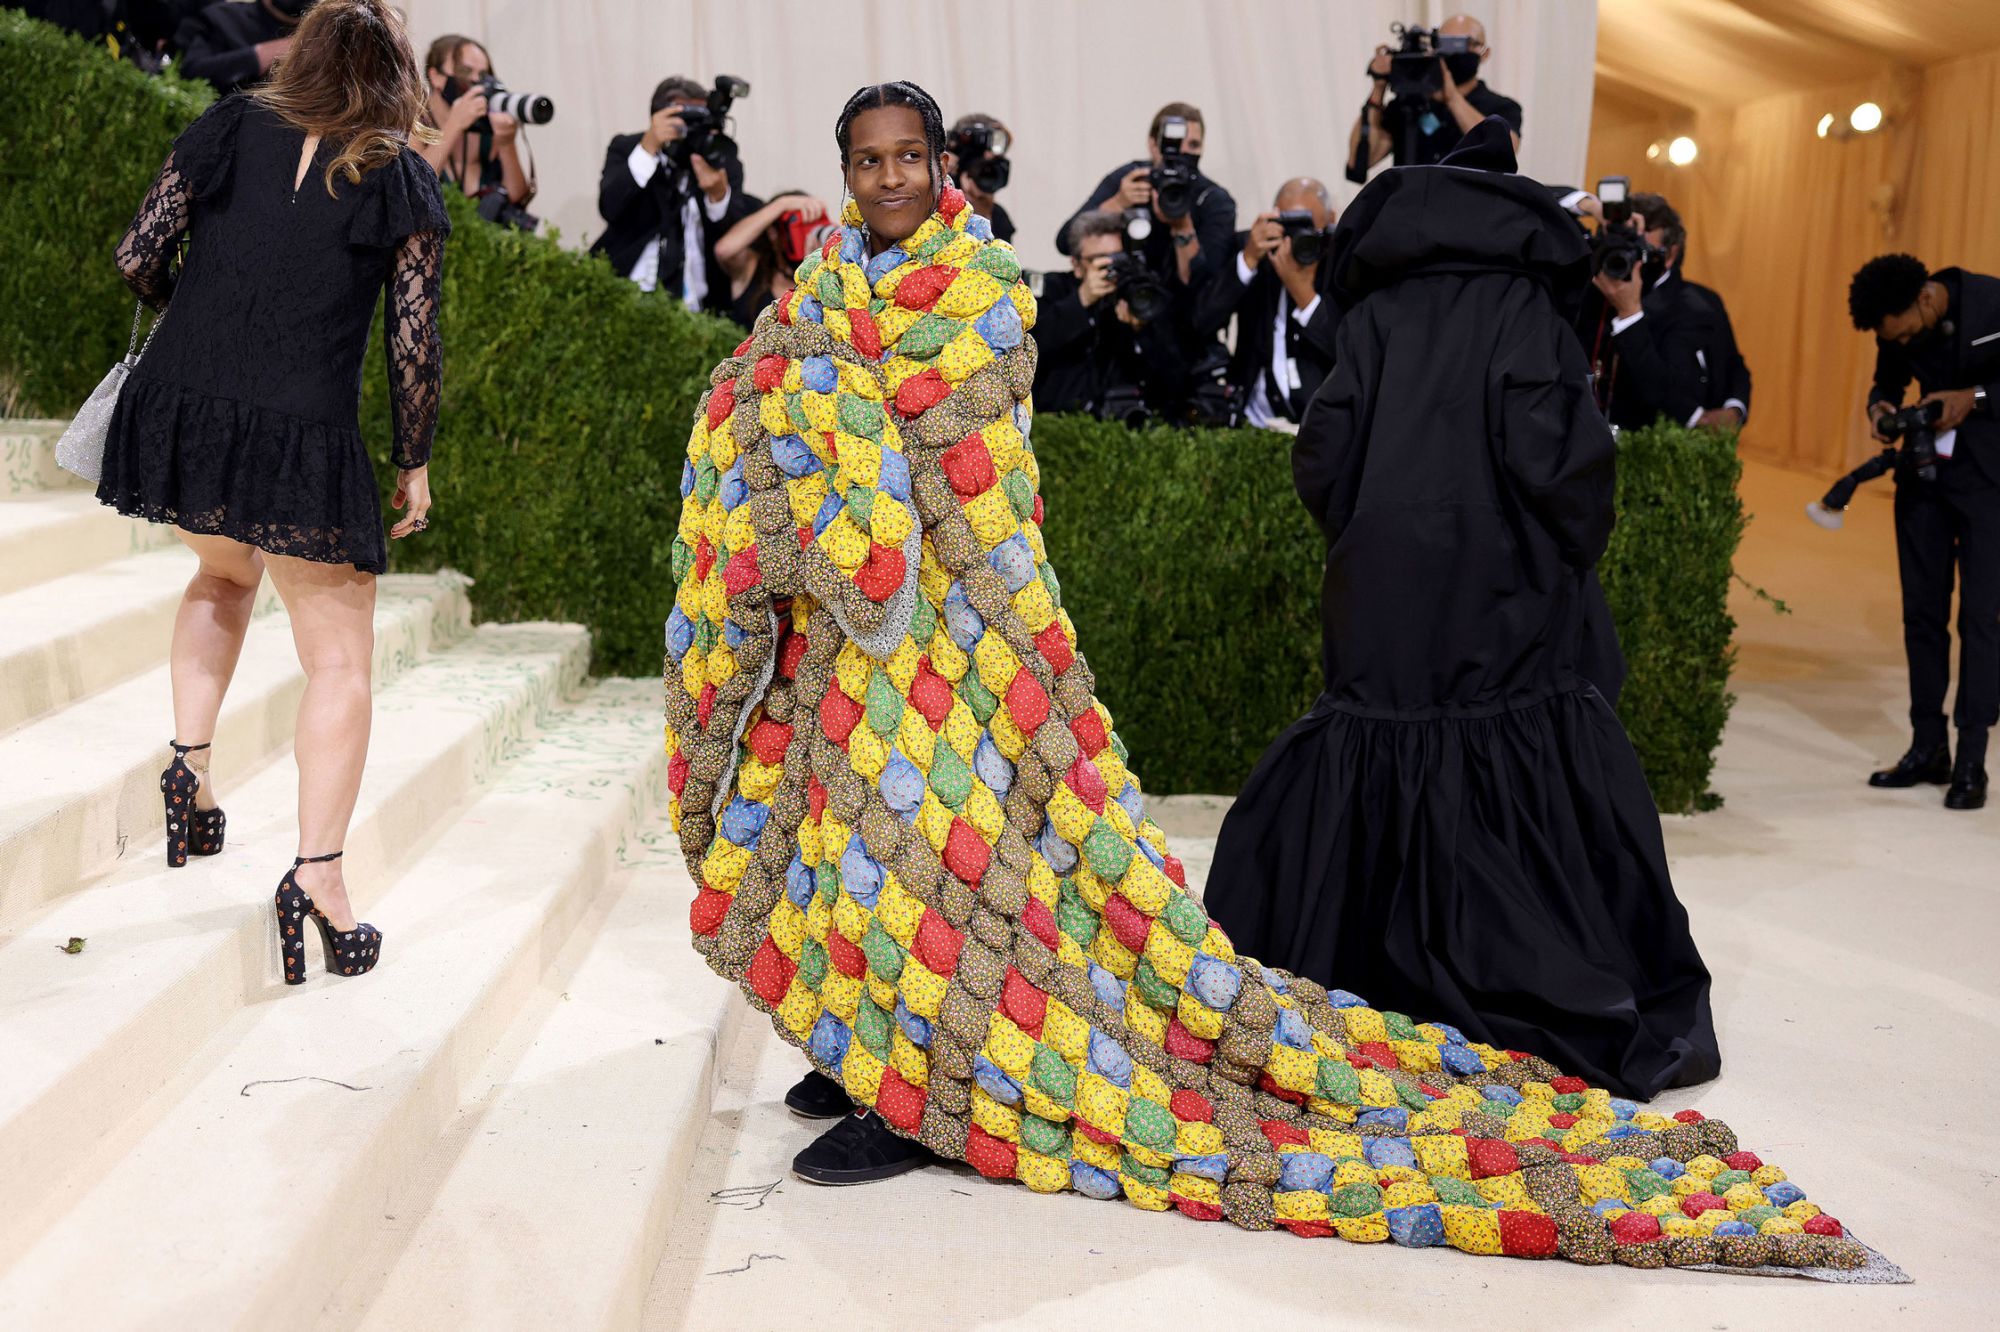 01 style quilt asap rocky met gala 2021 RESTRICTED